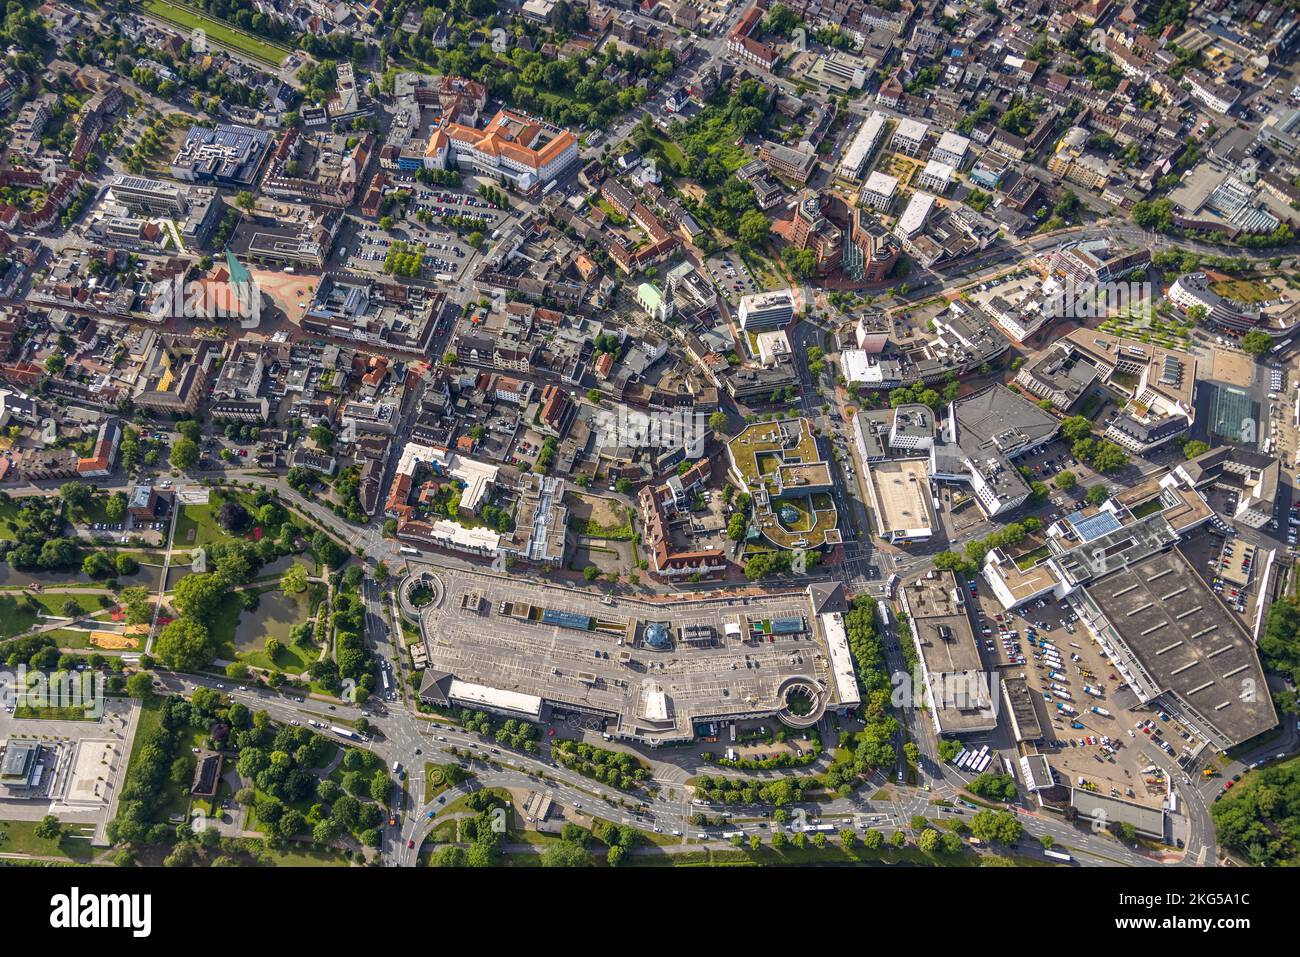 Aerial view, city center view with Allee-Center and City-Center, evang. Pauluskirche and St. Marien-Hospital Hamm, center, Hamm, Ruhrgebiet, North Rhi Stock Photo